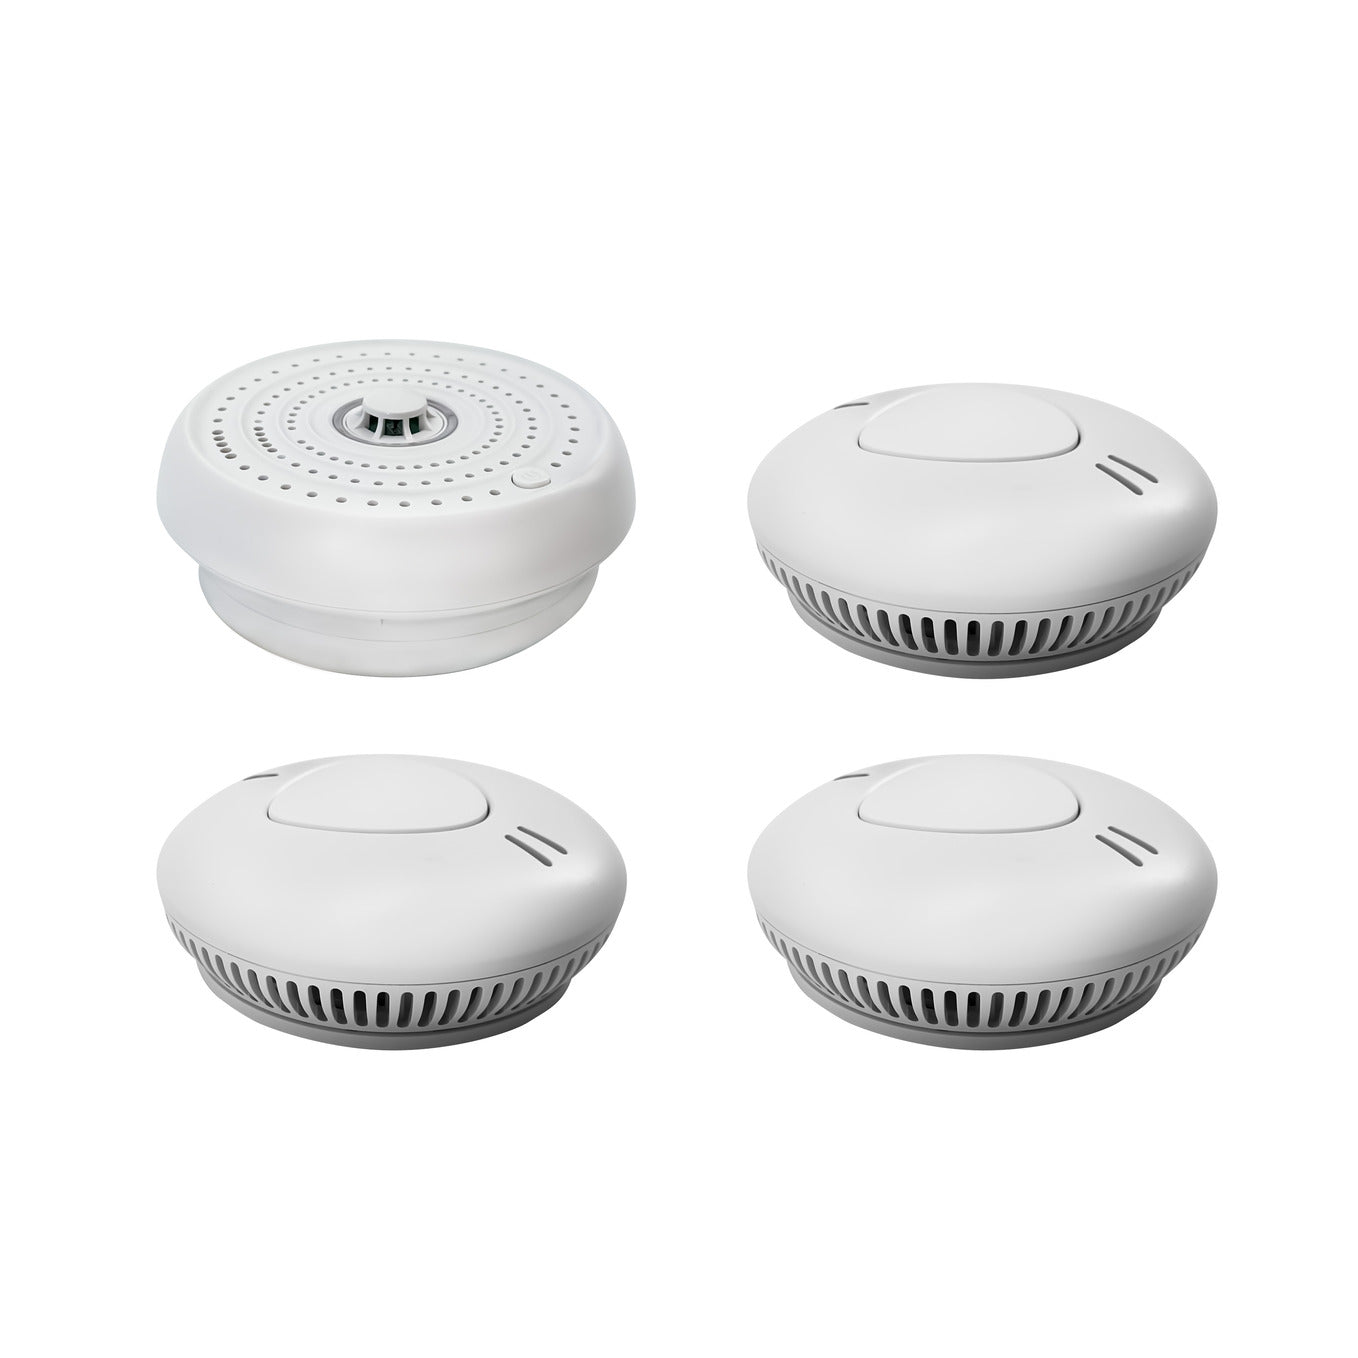 Firexo 4 Unit Interlinked Optical Smoke Alarm and Heat Alarm bundle all with 10 Year Tamper Proof Battery, White, Bundle contains 3x Smoke Alarm, 1x Heat Alarm